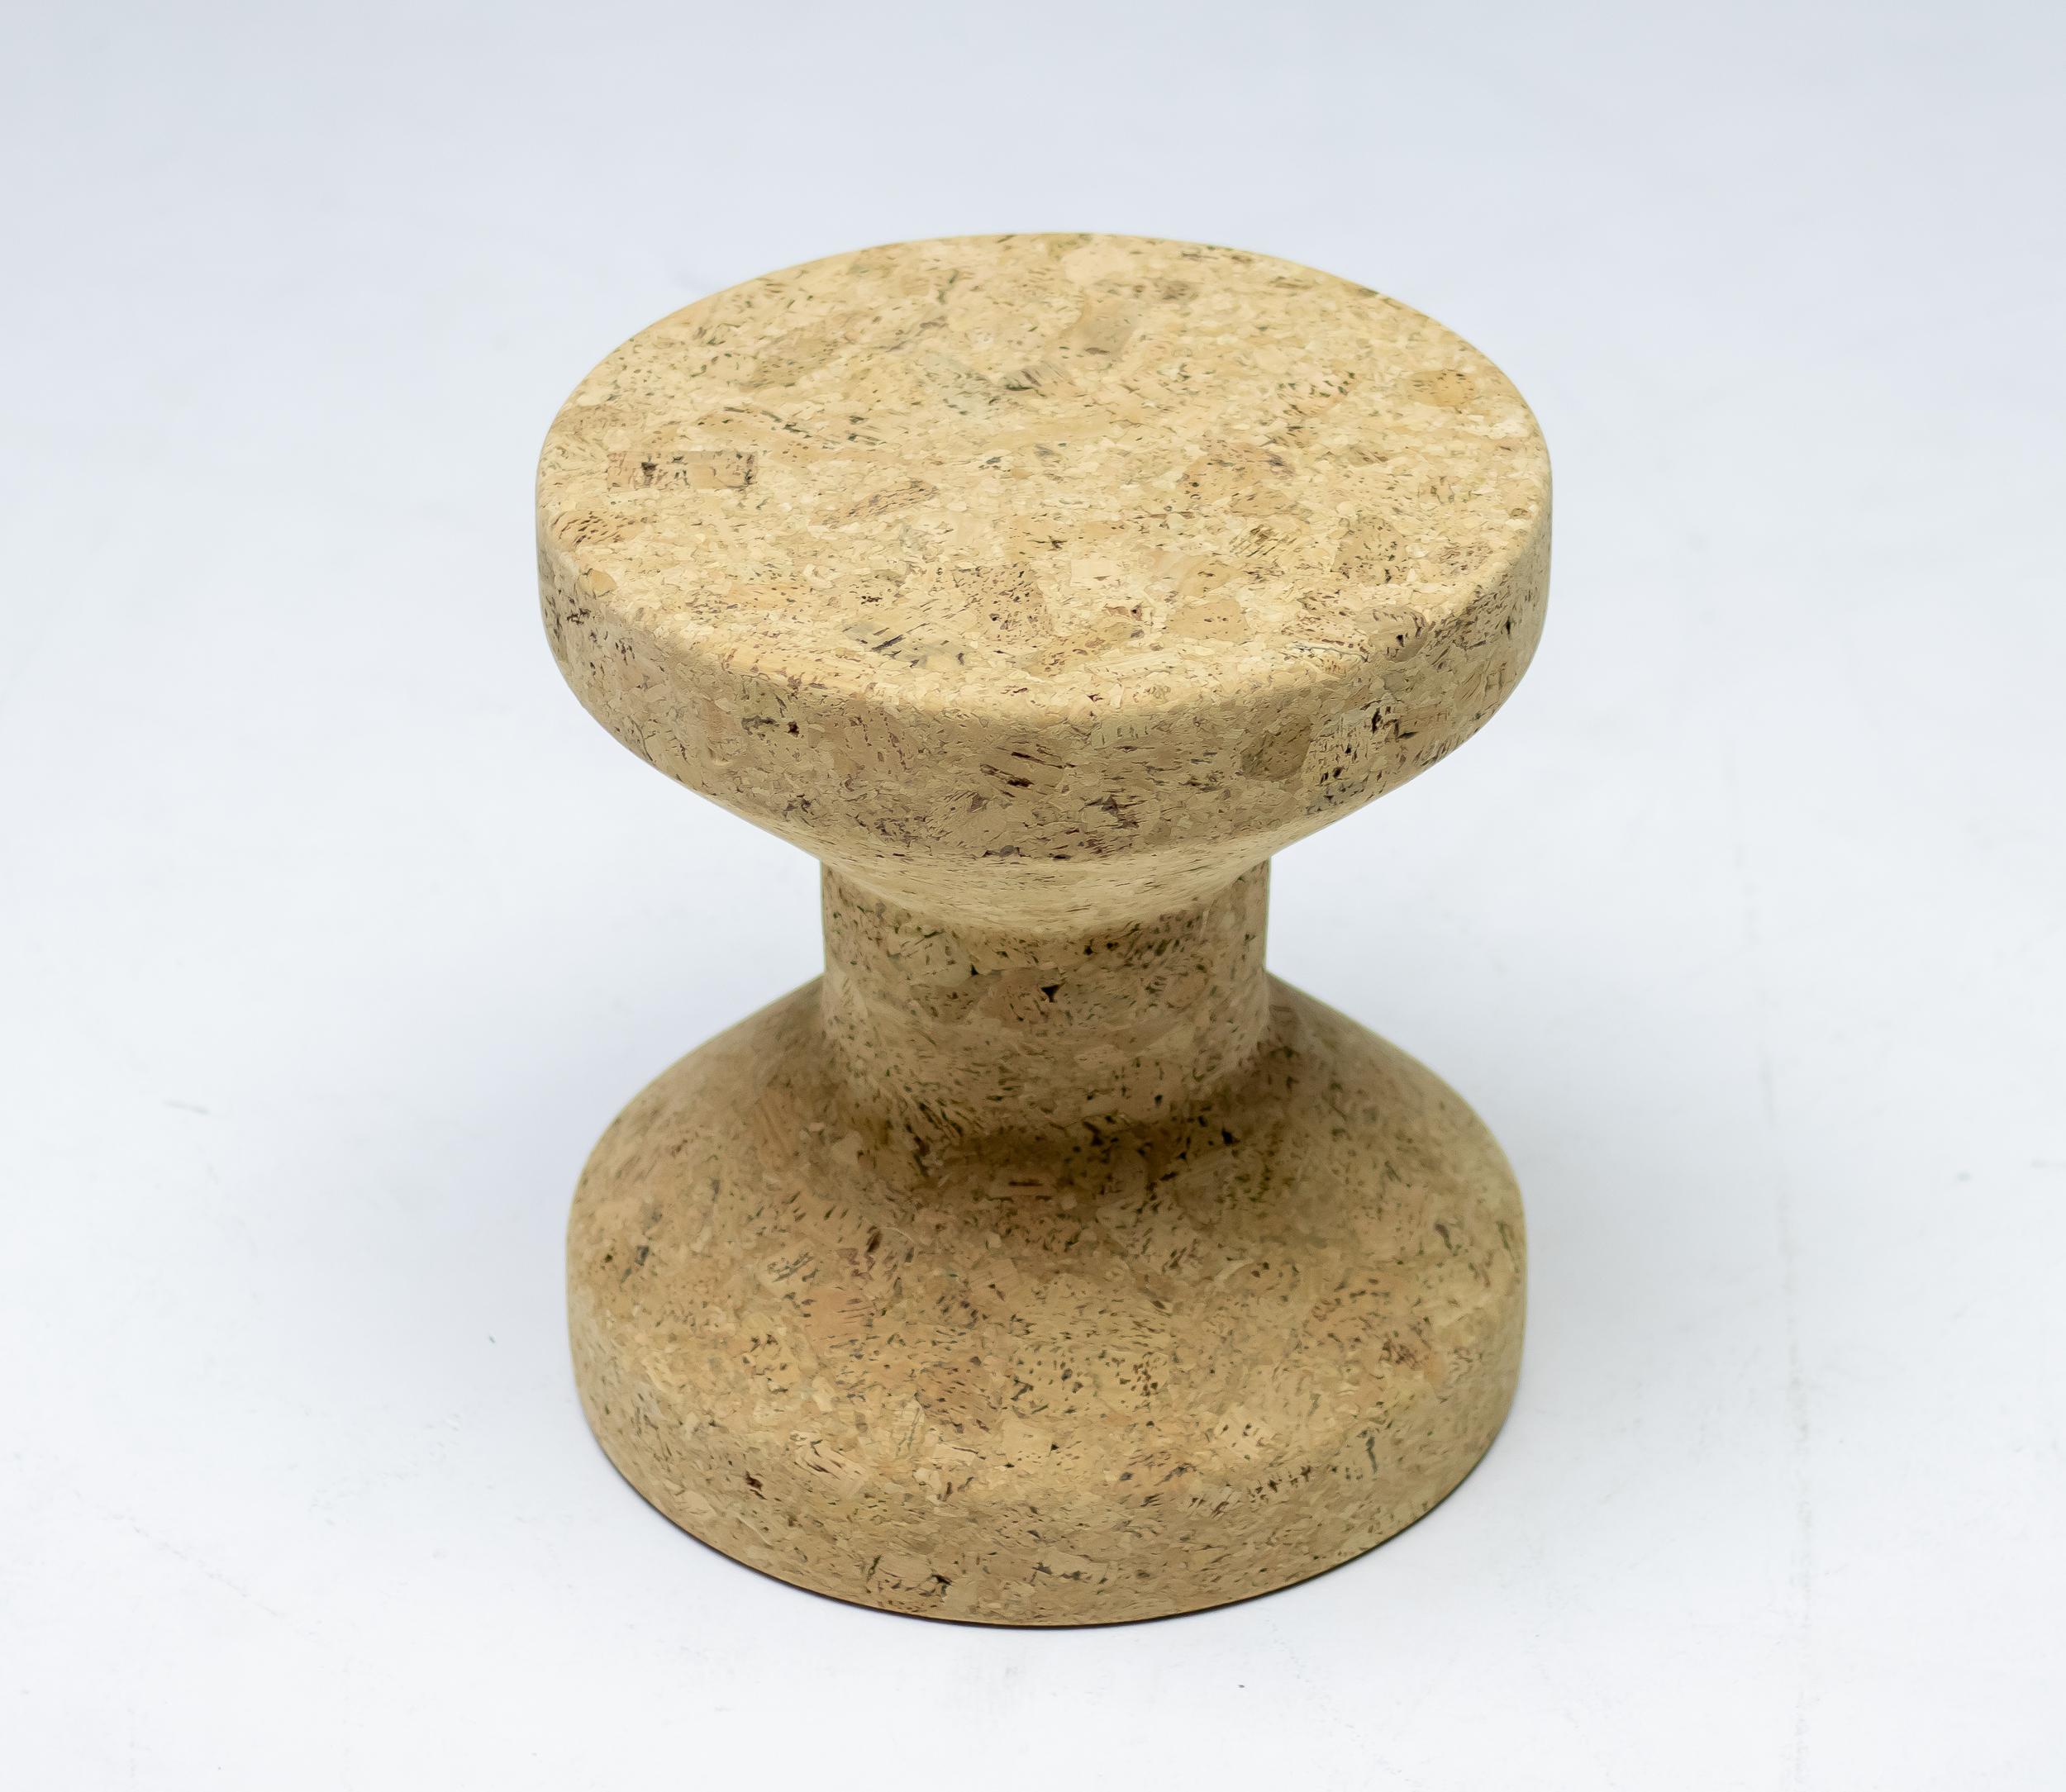 Stabile and robust, this stool or side table of the Cork Family by Jasper Morrison exploit the advantageous natural properties of cork: it is comparatively lightweight and extremely durable with a pleasant velvety feel. 
Material: solid turned